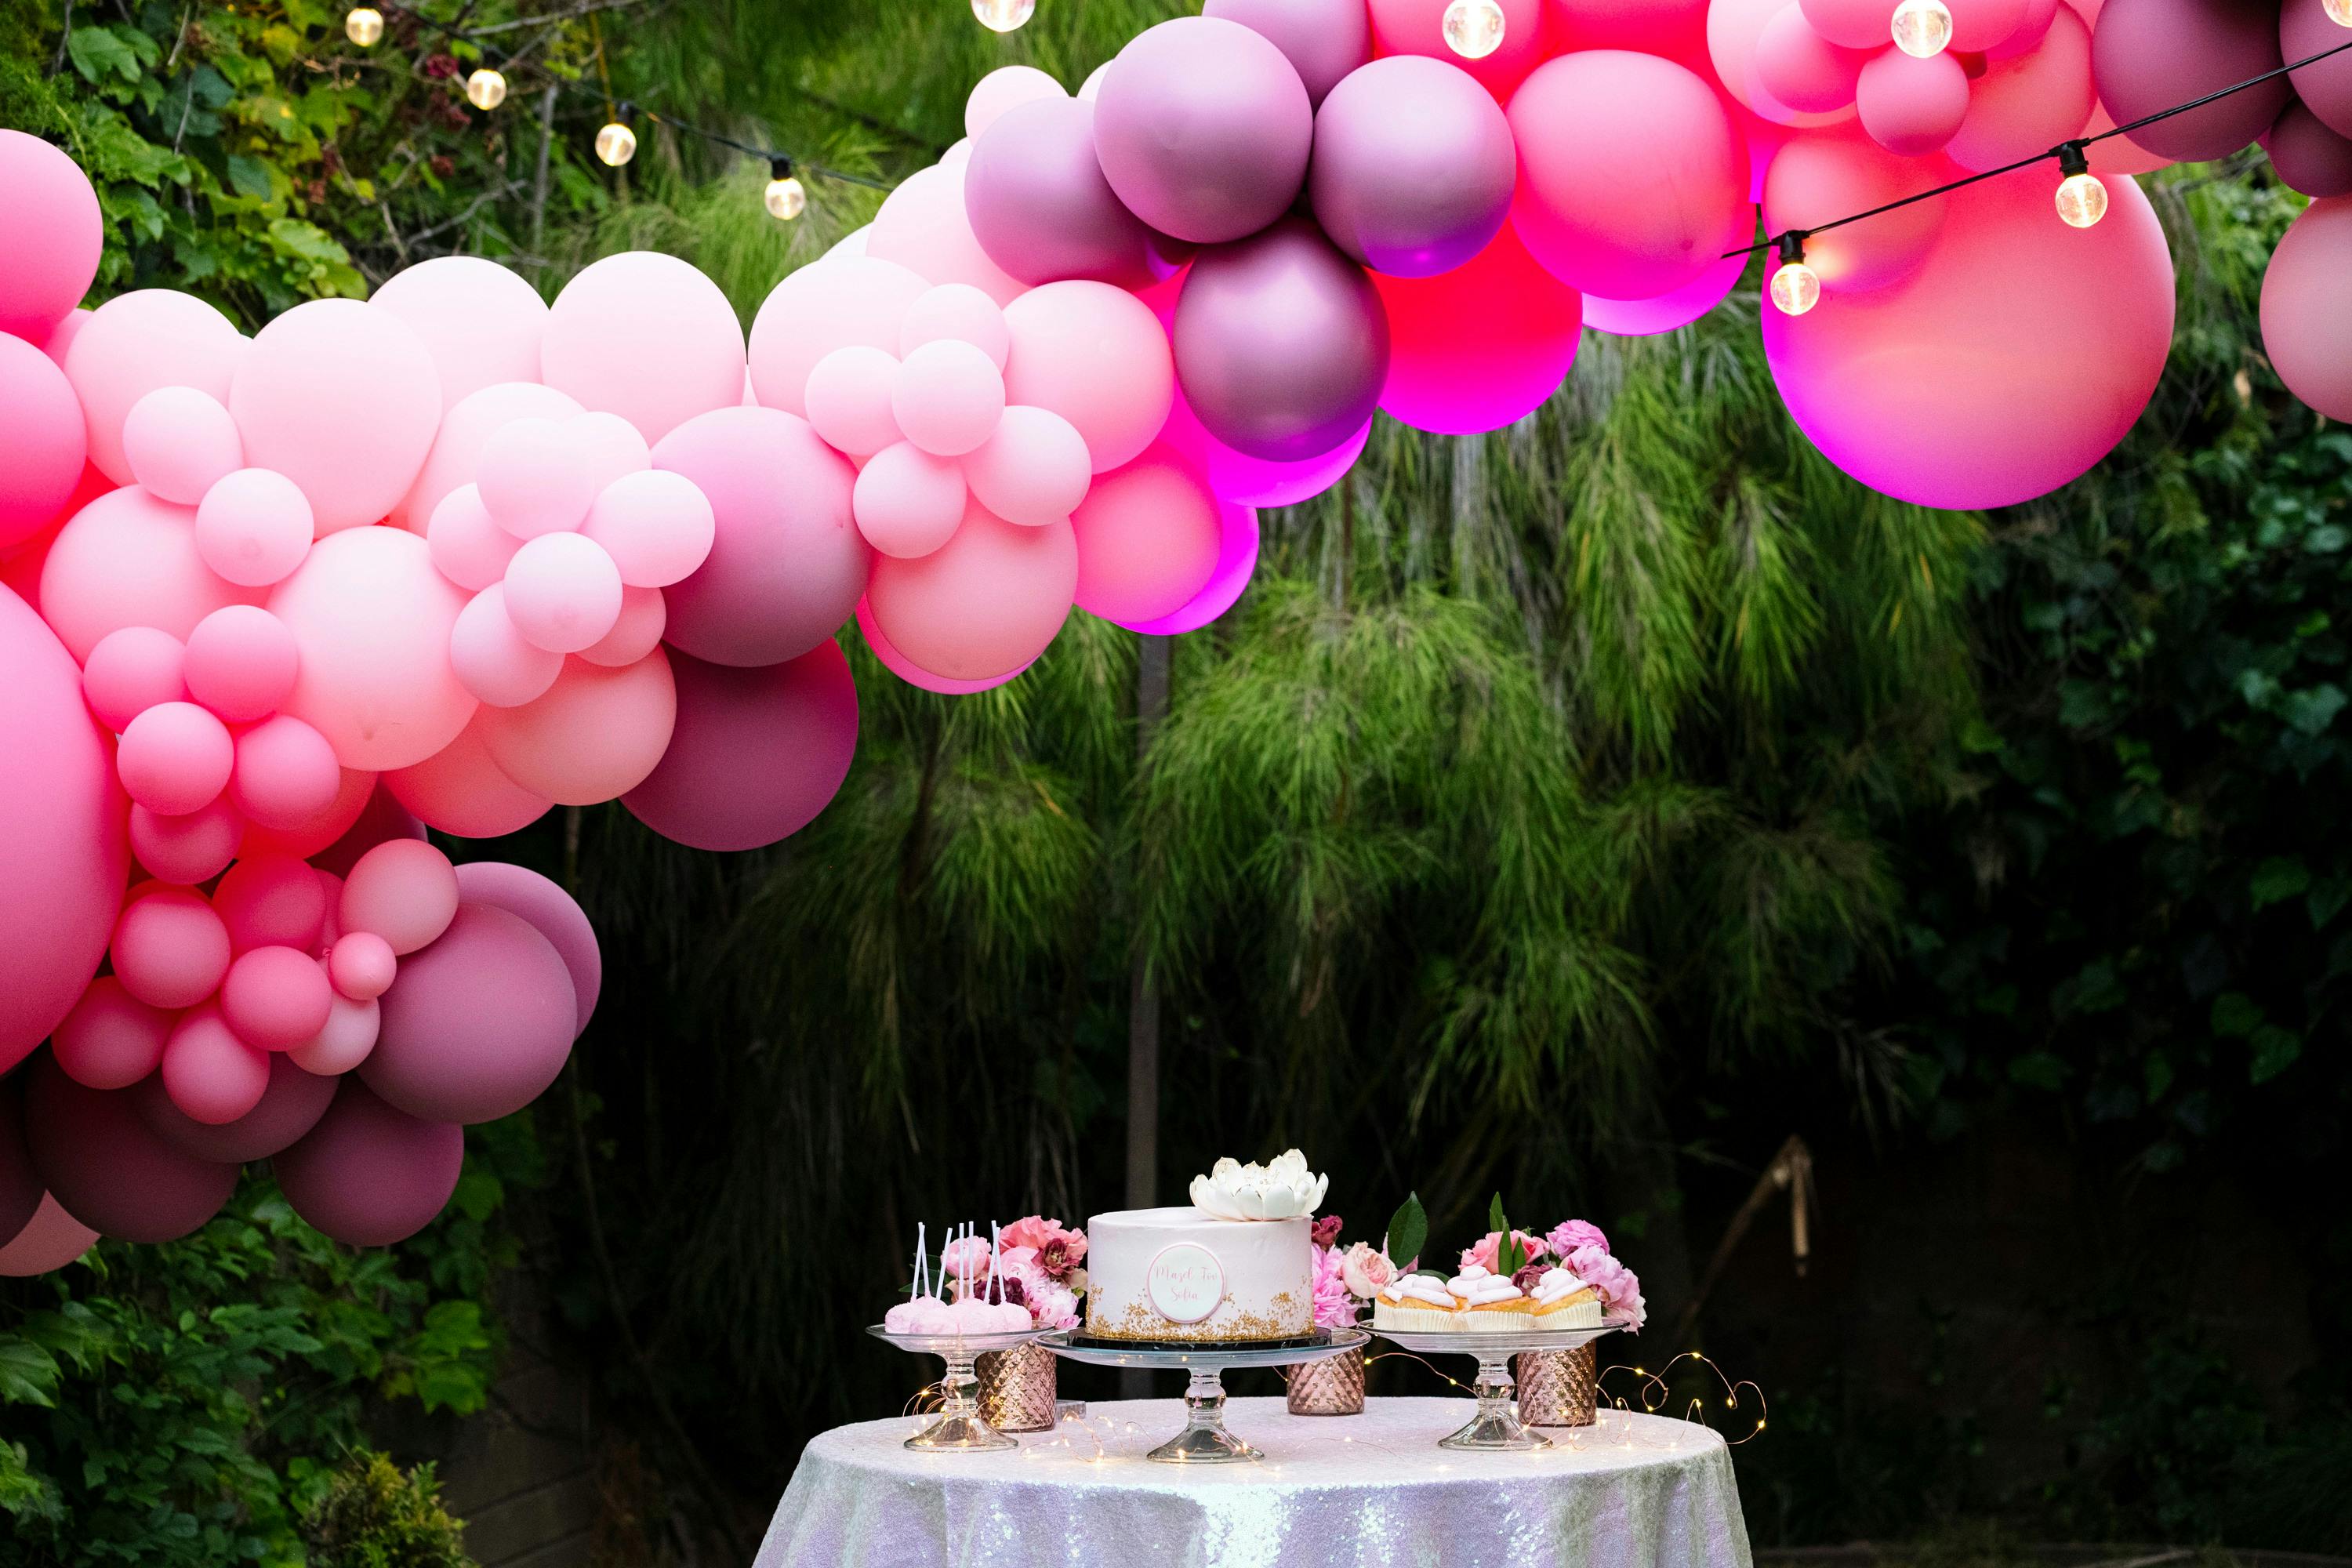 Los Angeles Zoom Bat Mitzvah With Pink Ballon Installation | PartySlate